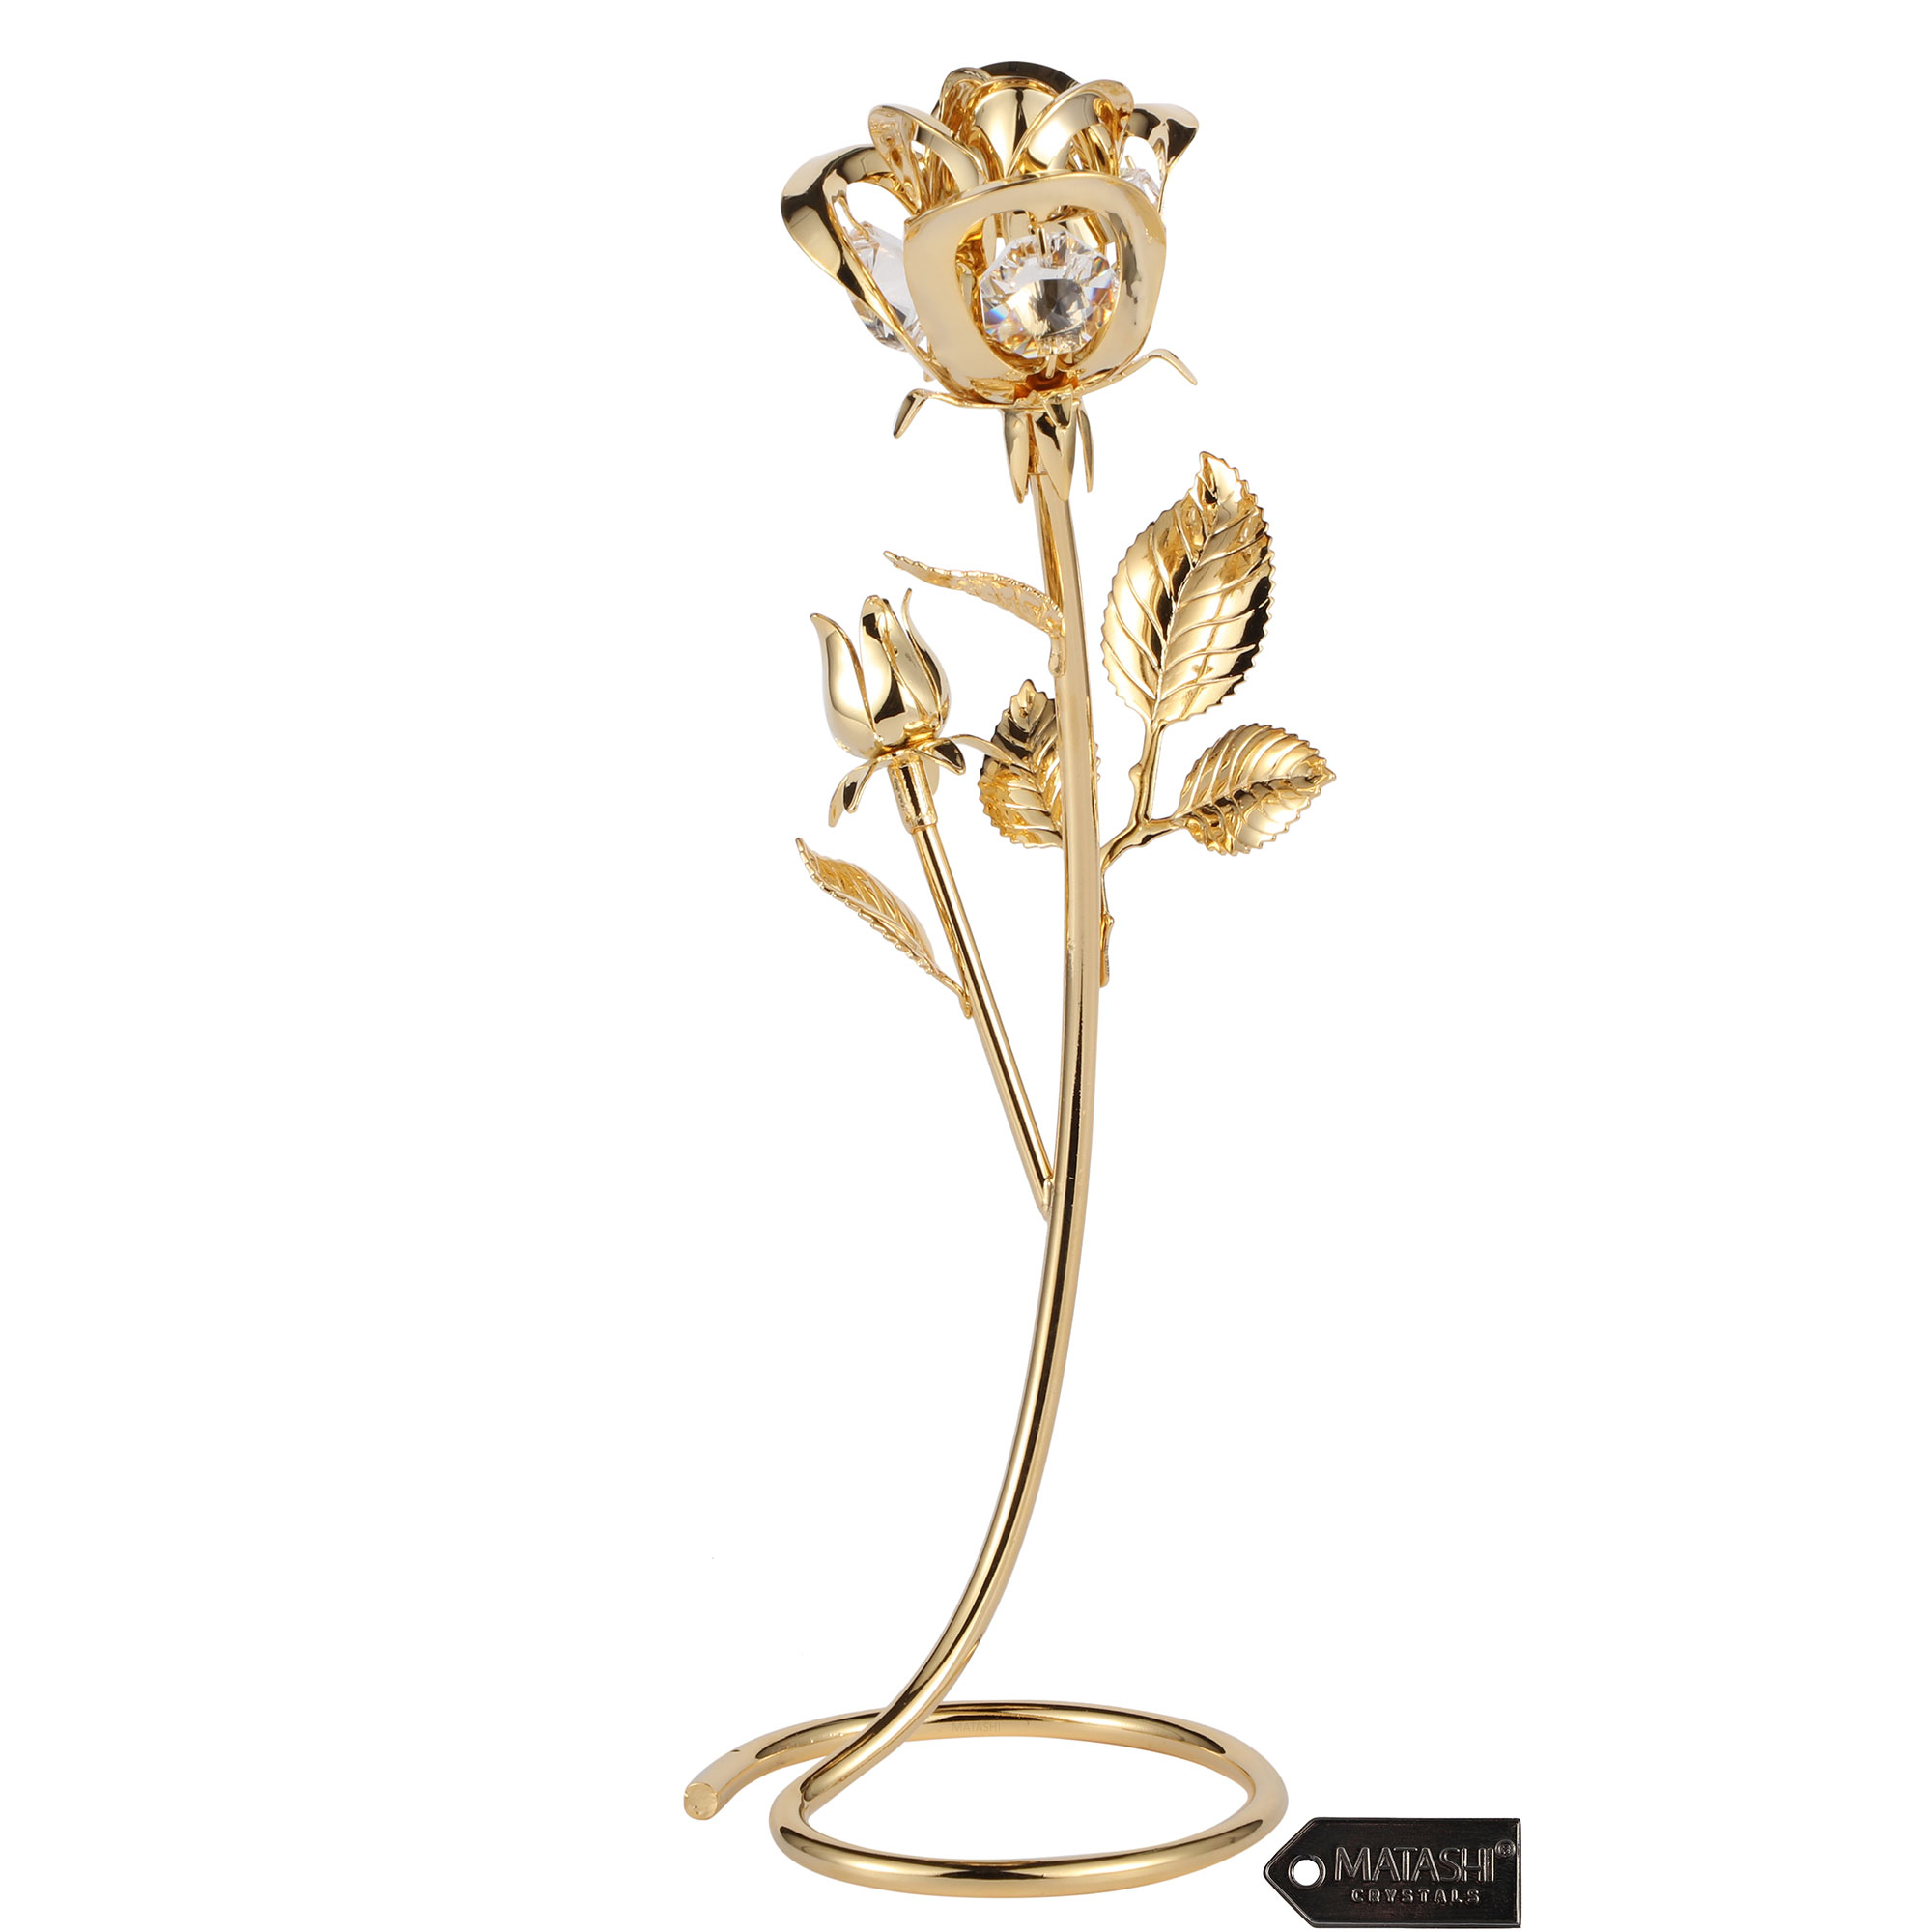 Matashi, Everlasting 7.5 24K Gold Plated Long Stem Rose Flower With Premium Crystals, Great Gift For Christmas, New Year, Valentines Day